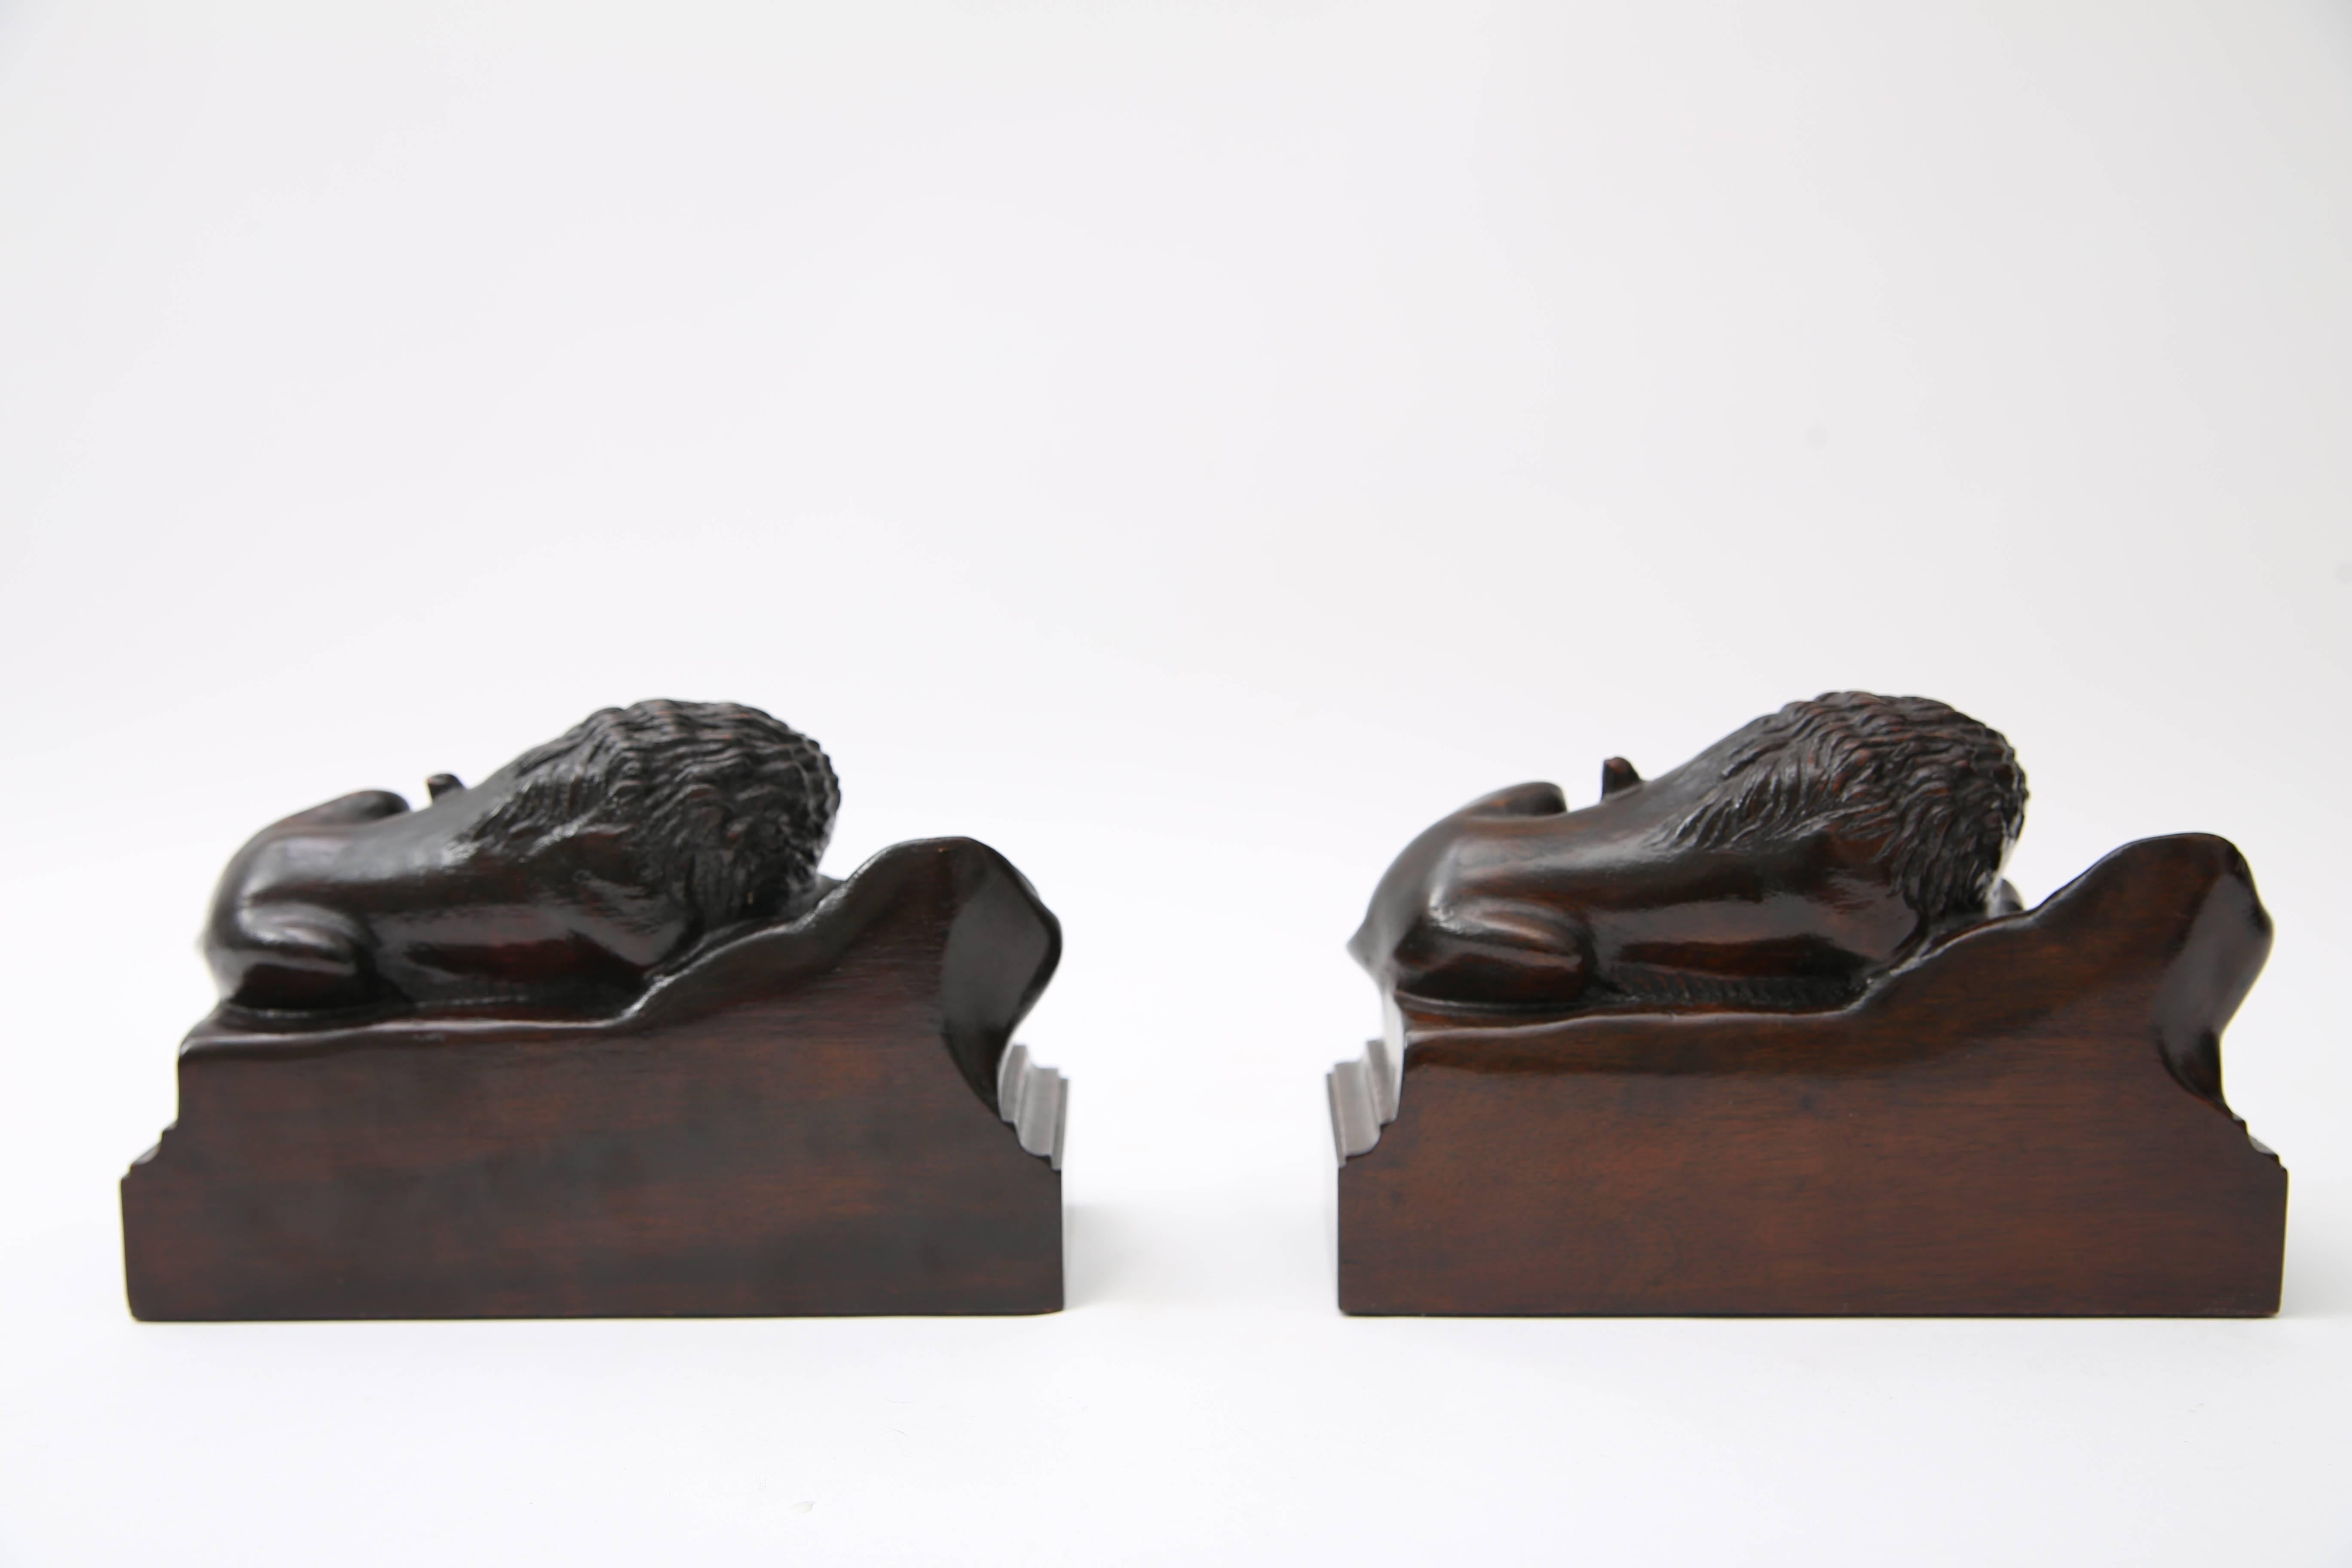 Pair of Carved Wood Book Ends Depicting the Swiss Guard Lions of Lucerne, France 1